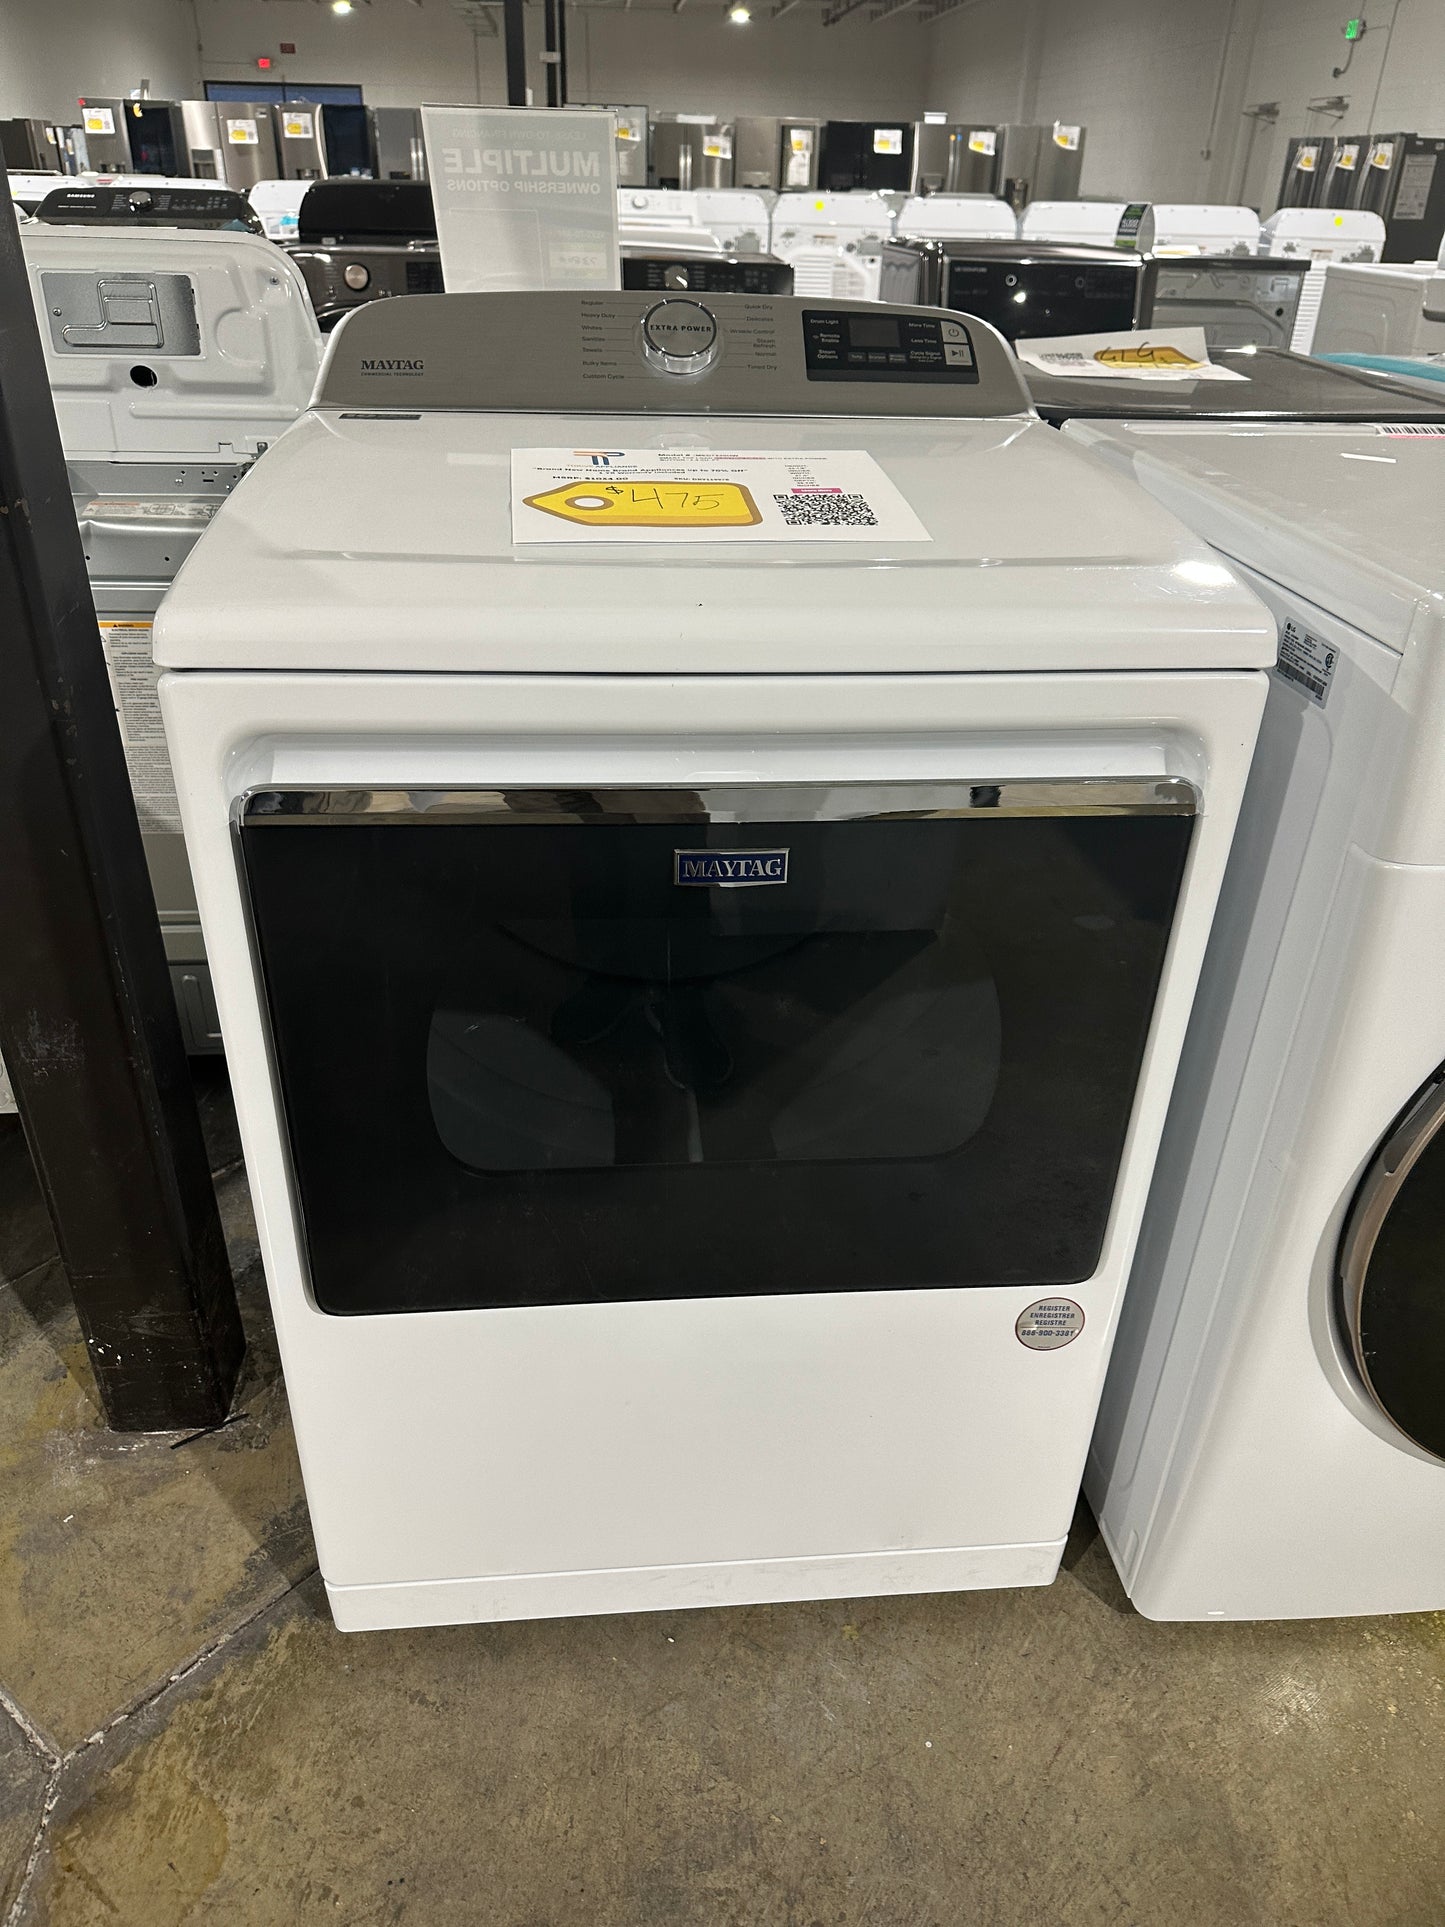 GREAT NEW MAYTAG SMART ELECTRIC DRYER MODEL: MED7230HW  DRY11997S